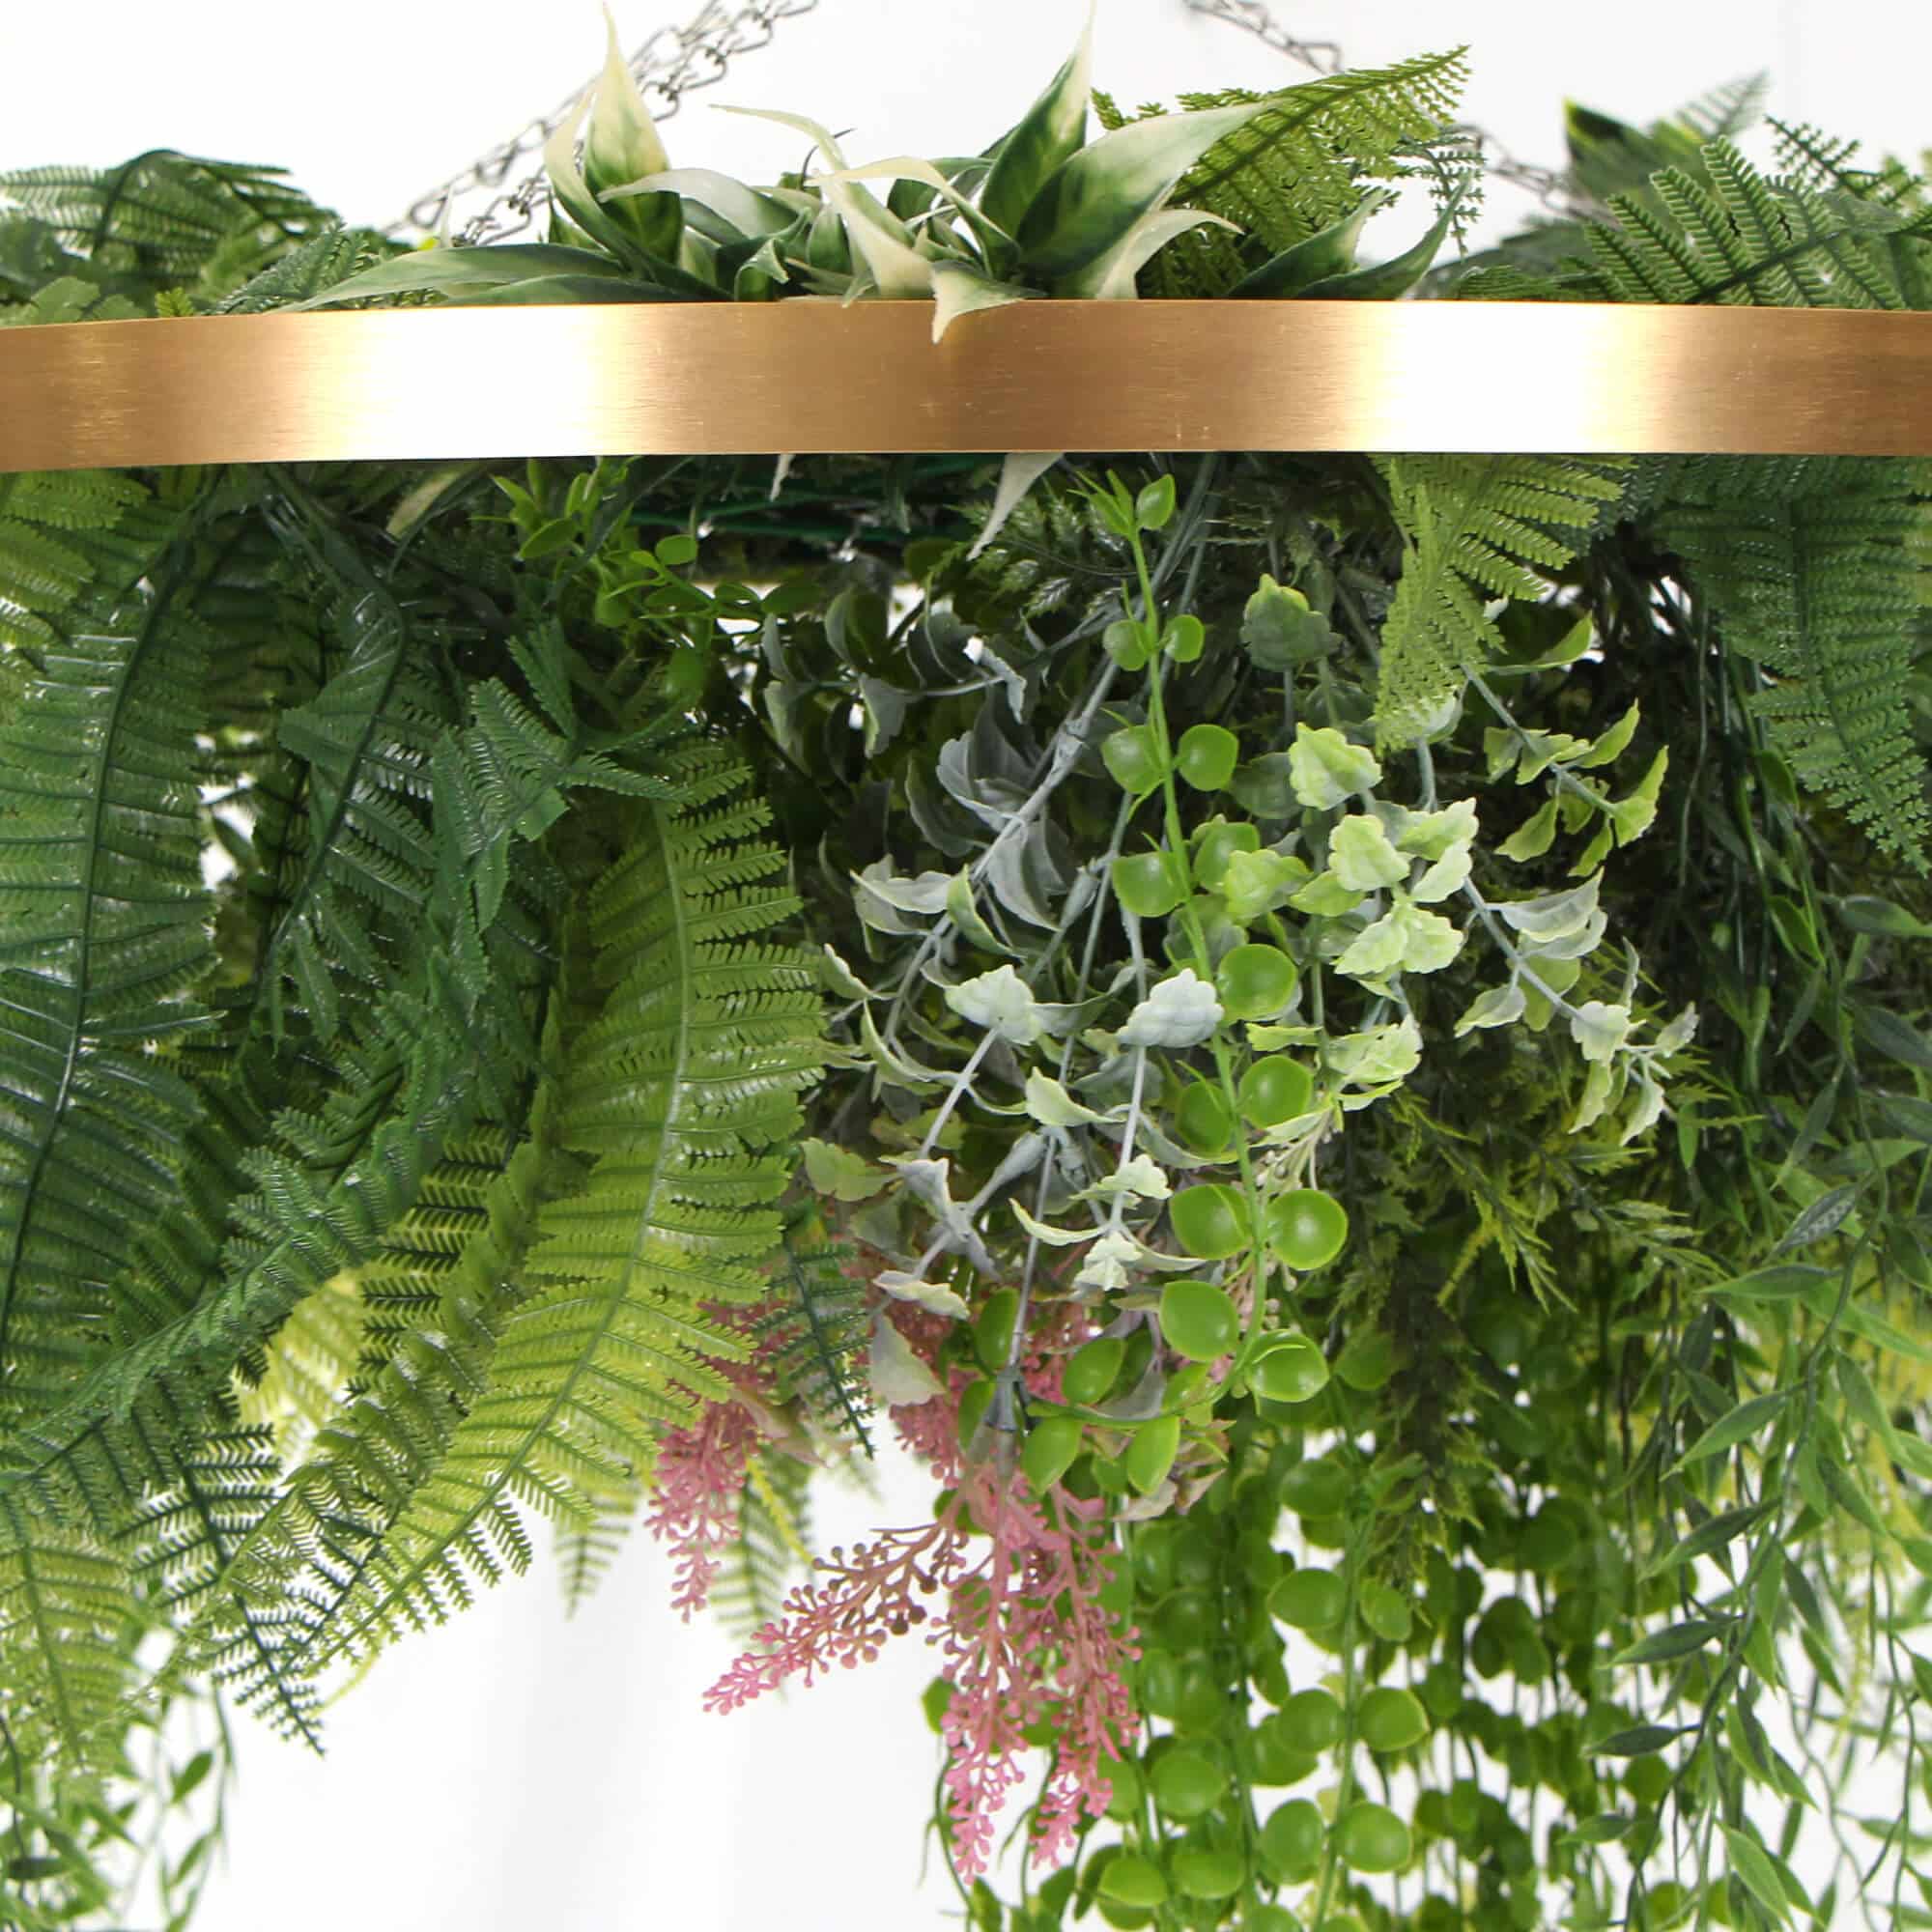 Imitation Gold Artificial Hanging Green Wall Disc 40cm (Limited Range)